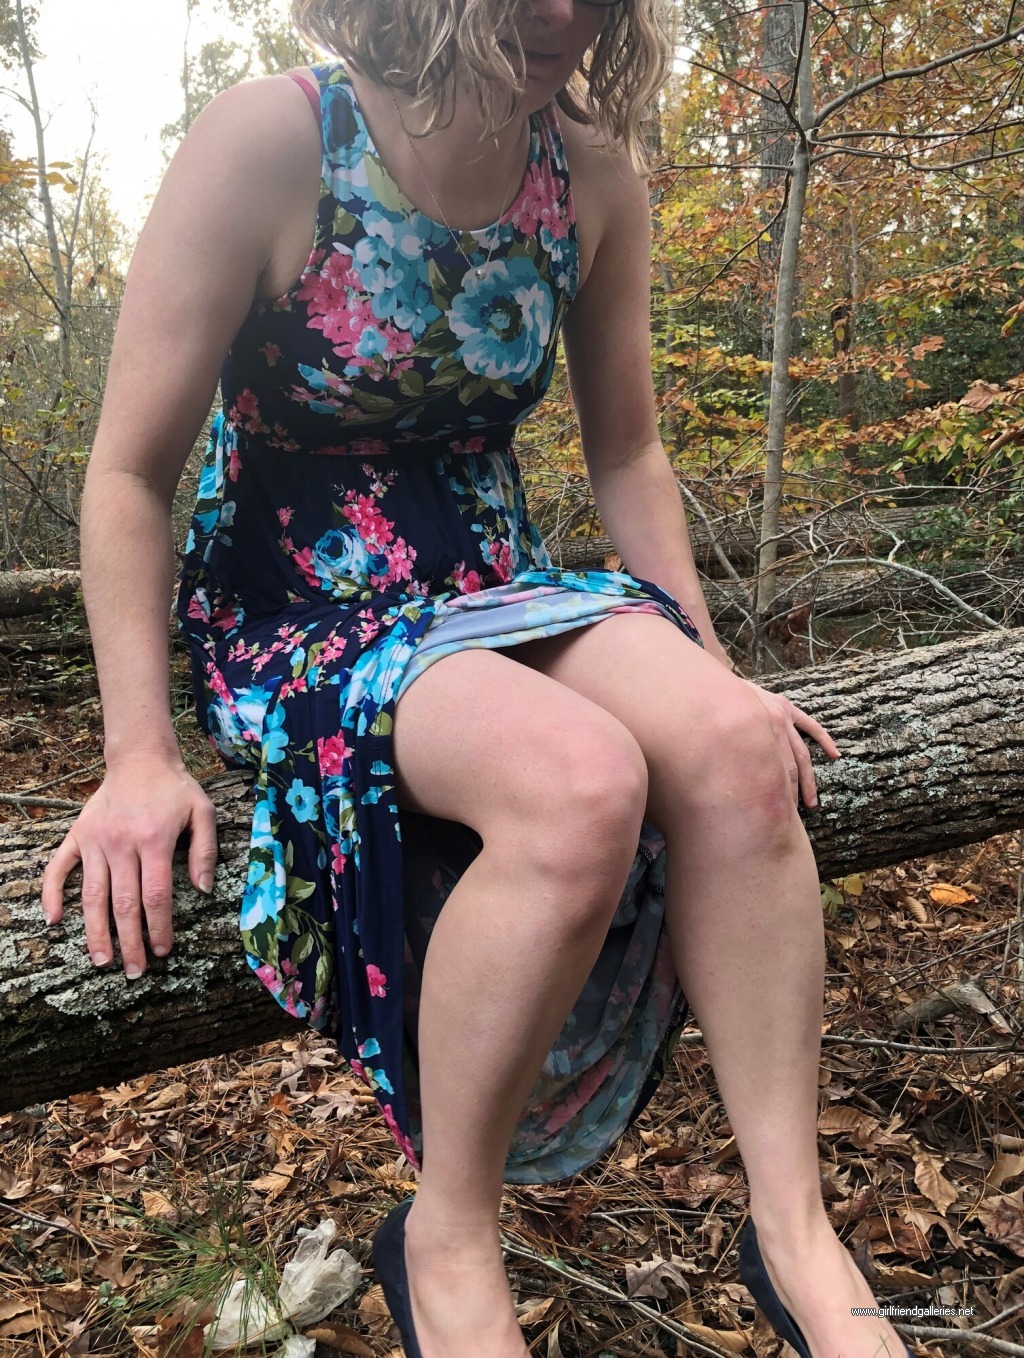 An angel getting naked in the woods. 